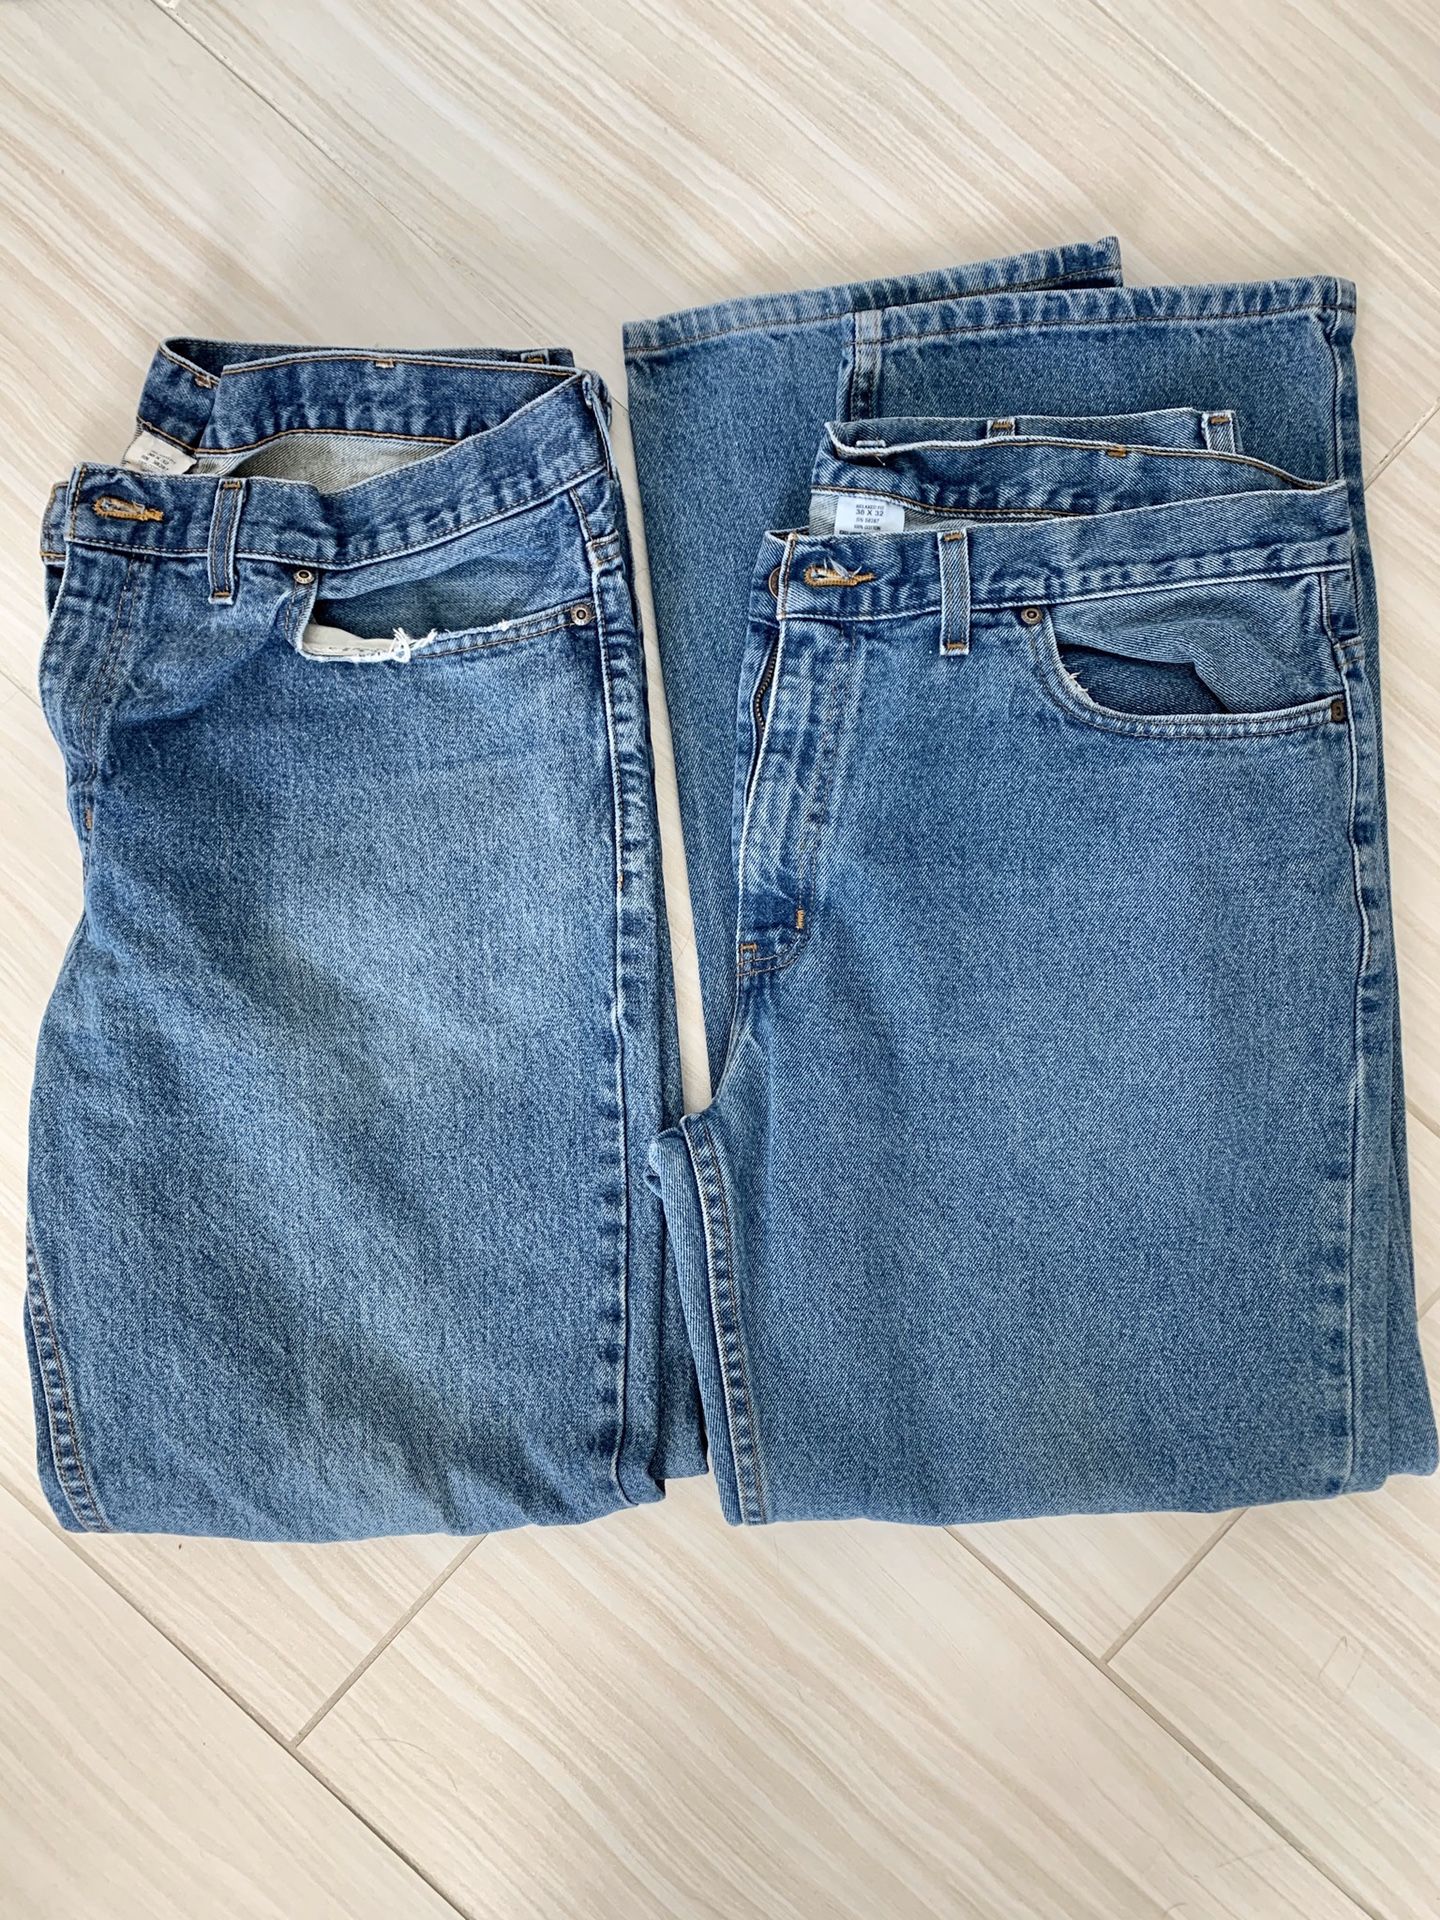 LOTS OF MENS - BLUE DENIM JEANS 38x32 - FADED GLORY RELAXED FIT $5 EACH OBO!